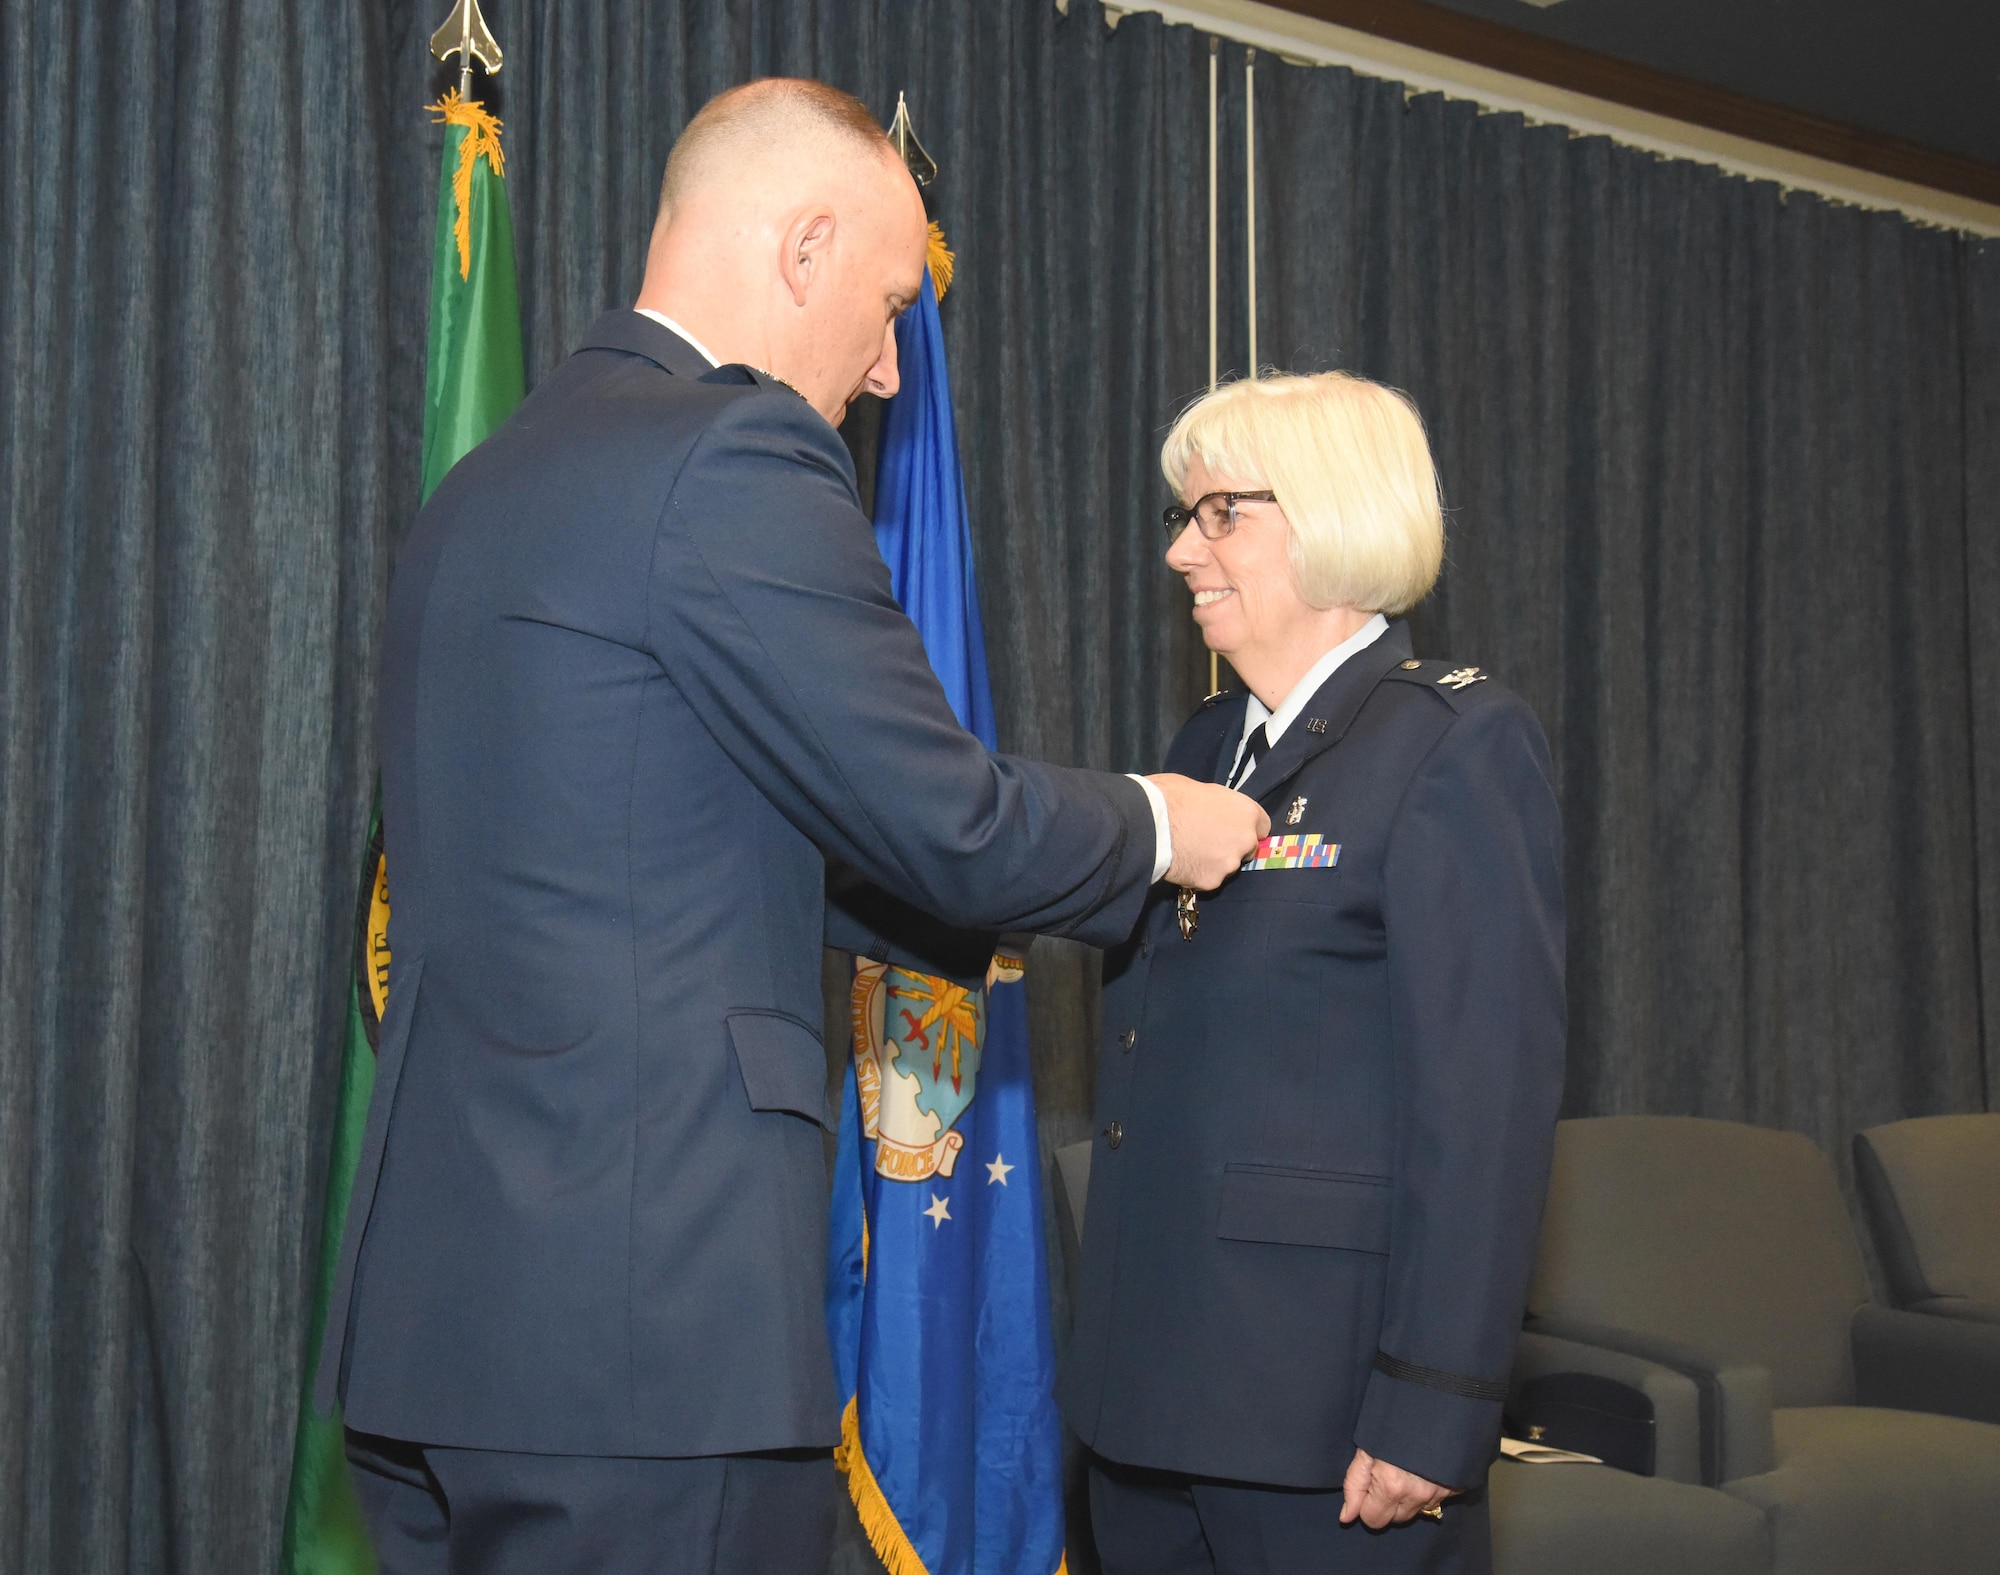 Col. Ryan Samuelson, 92nd Air Refueling Wing commander, pins the Legion of Merit Medal to the uniform of Col. Meg Carey, during the 92nd Medical Group change of command ceremony June 16, 2017 at Fairchild Air Force Base, Washington. She also was presented the Washington Air National Guard Meritorious Service Medal from Col. Dixon, 141st Maintenance Group commander.  (U.S. Air Force photo/Staff Sgt. Samantha Krolikowski)